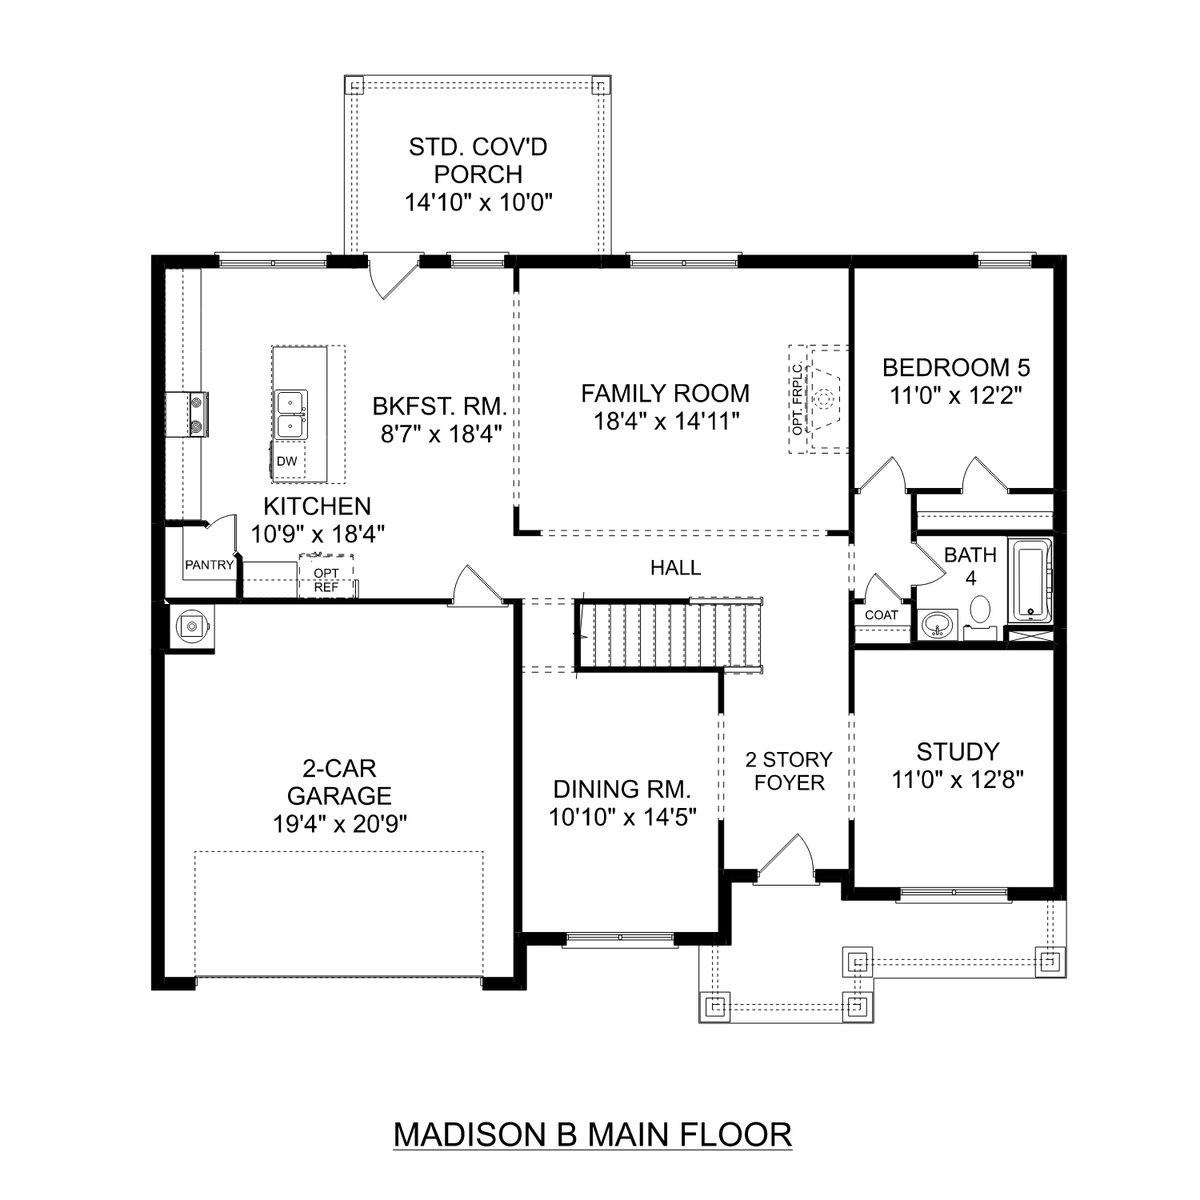 1 - The Madison B floor plan layout for 615 Magnolia Cove Lane SW in Davidson Homes' Magnolia Preserve community.